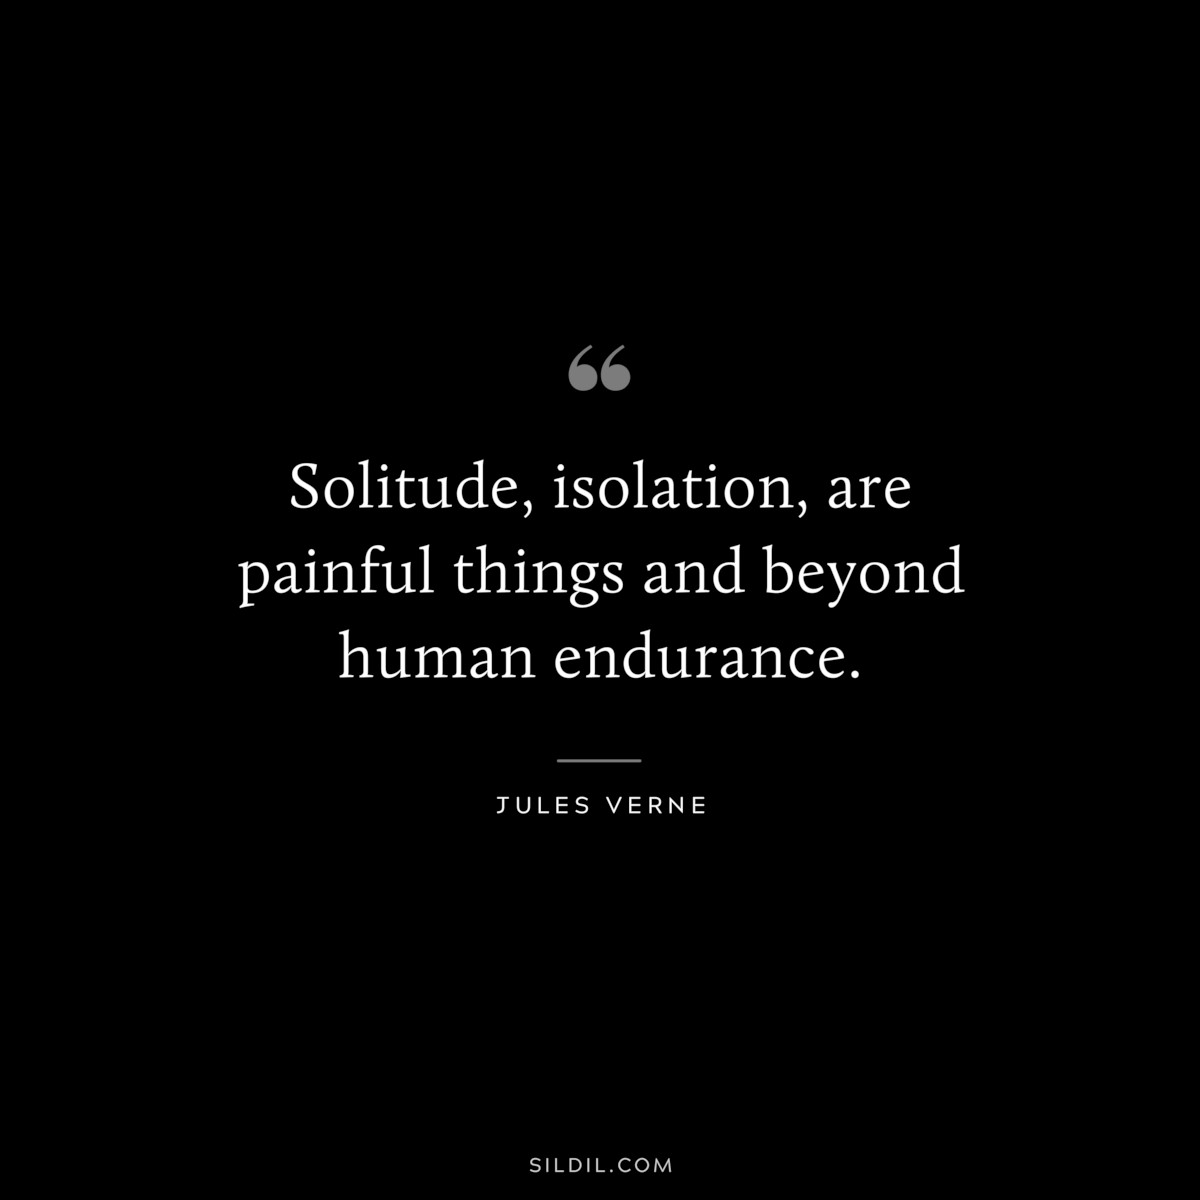 Solitude, isolation, are painful things and beyond human endurance.